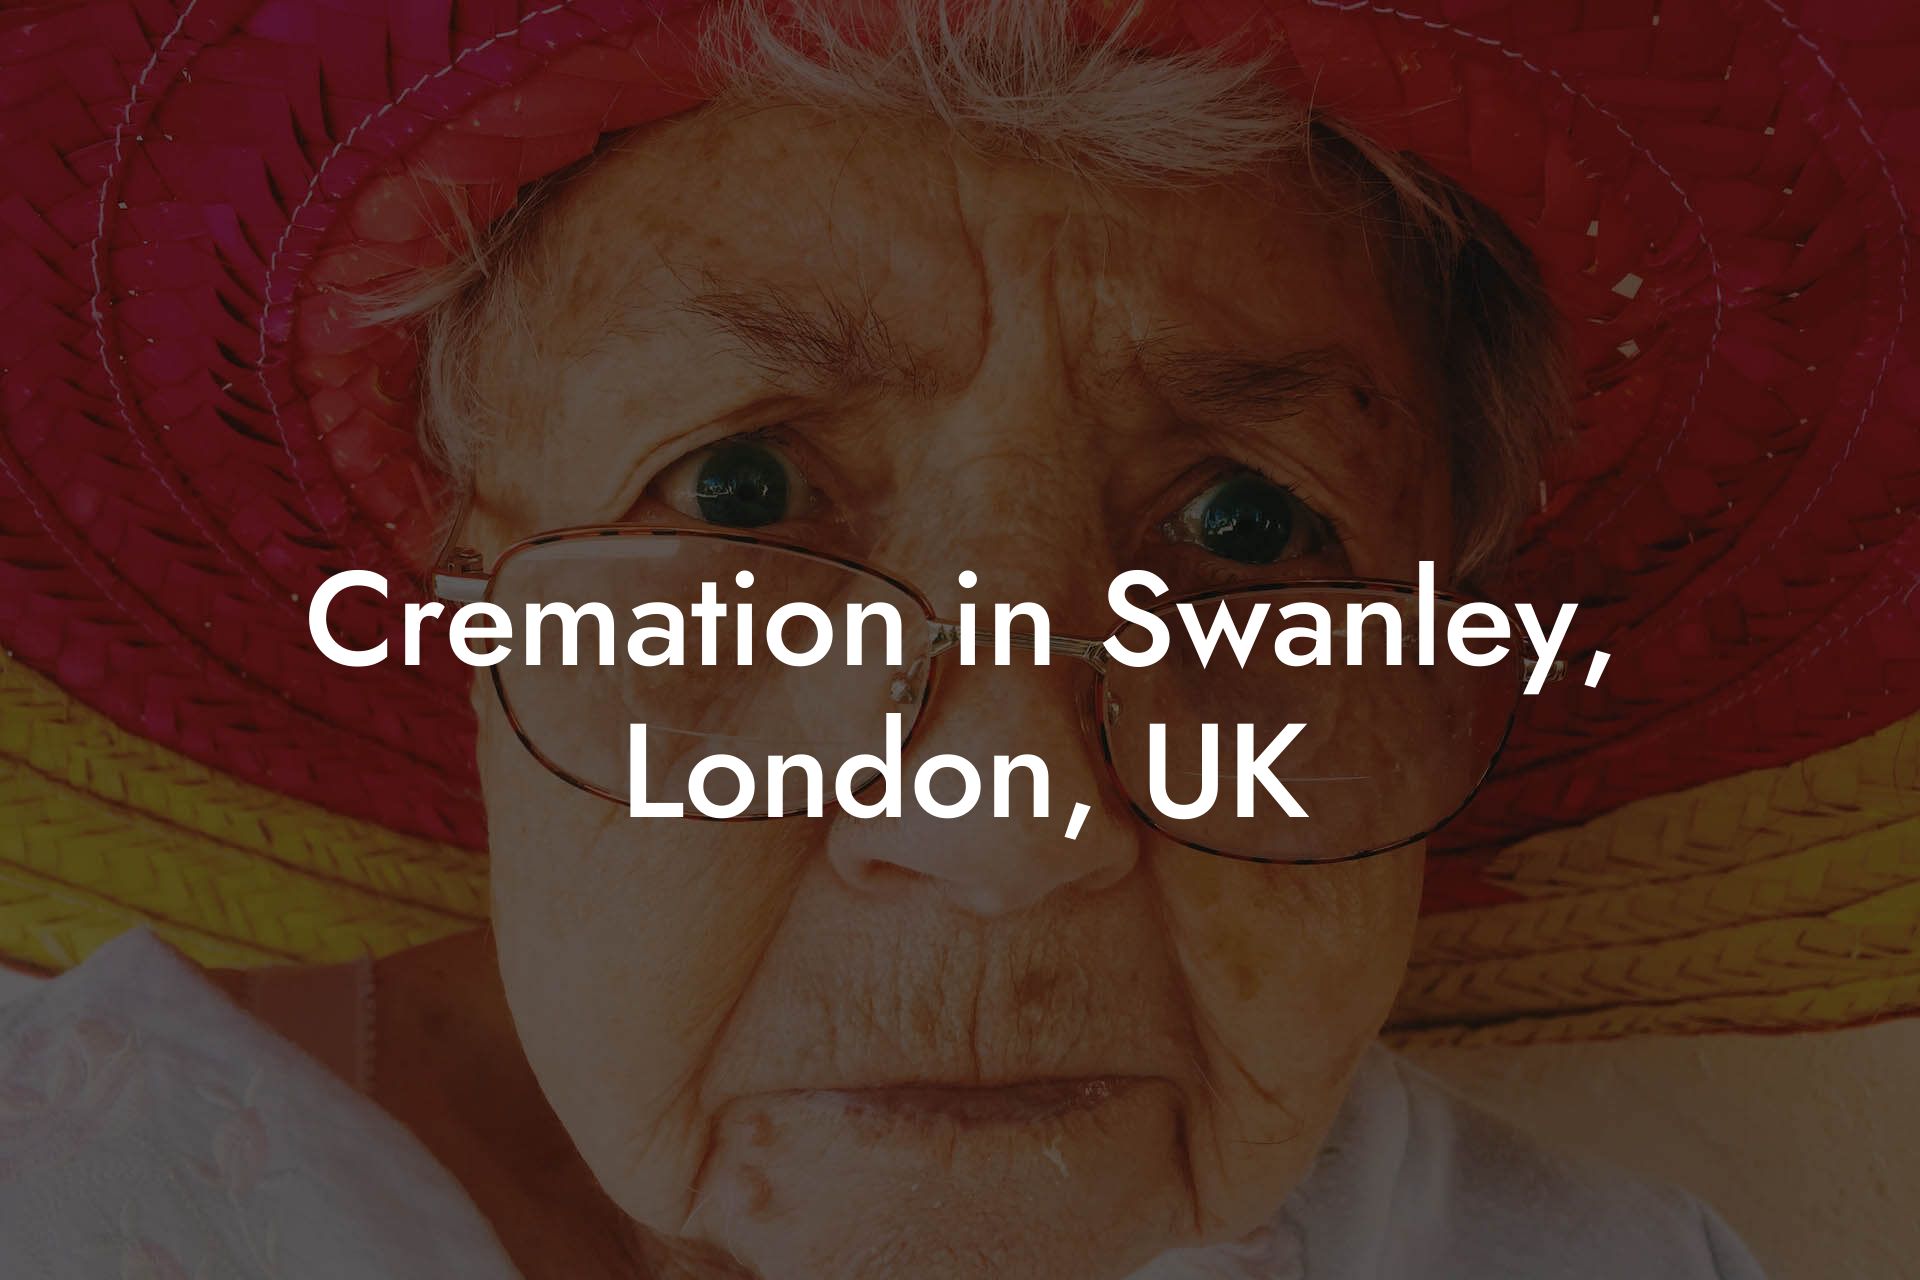 Cremation in Swanley, London, UK